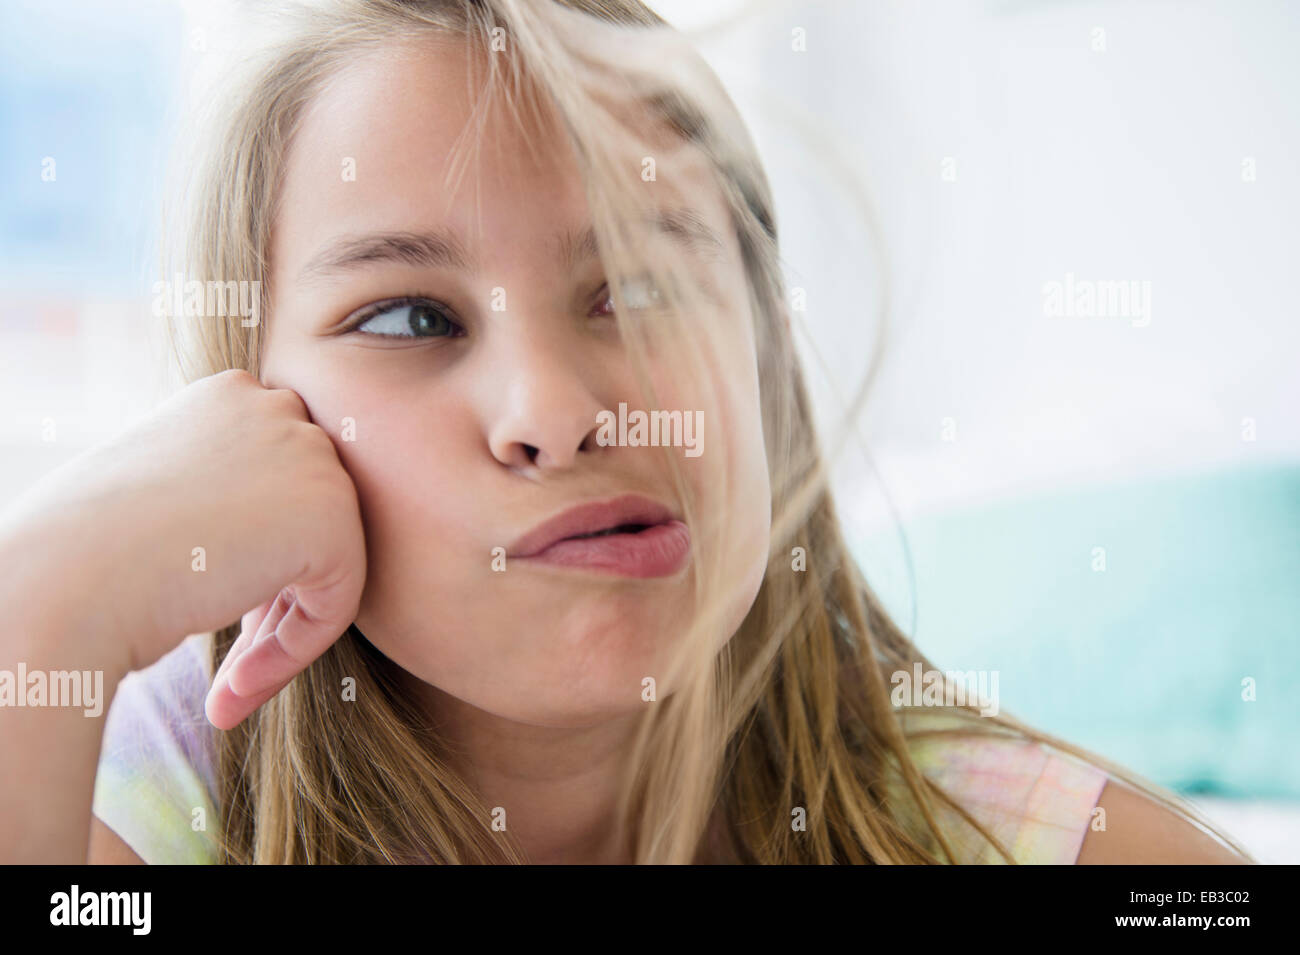 Caucasian girl blowing hair from her face Stock Photo